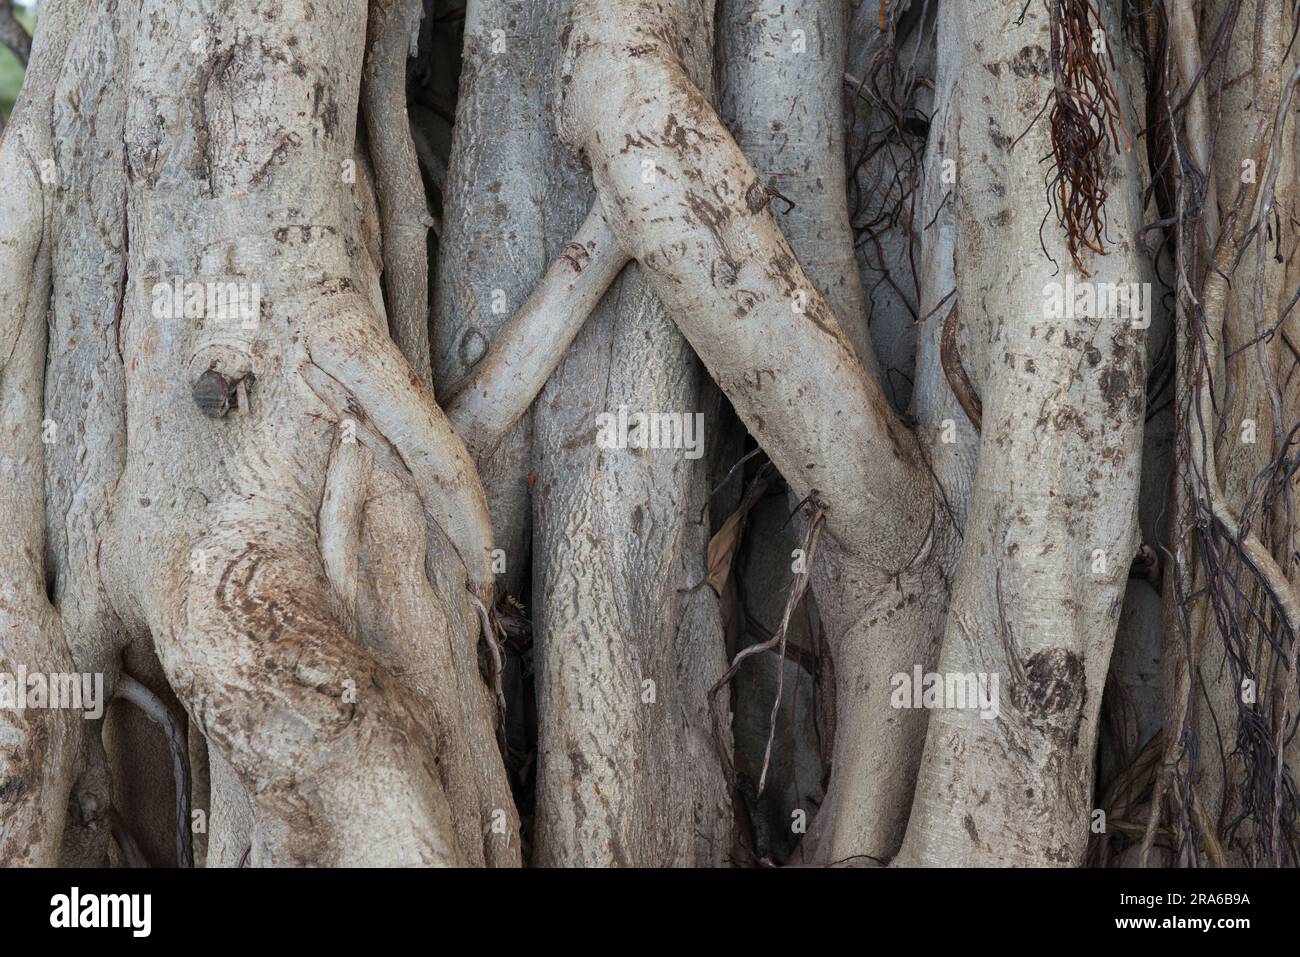 A close-up look at the thick roots of a Hawaiian Banyan tee in a Honolulu Park. Stock Photo